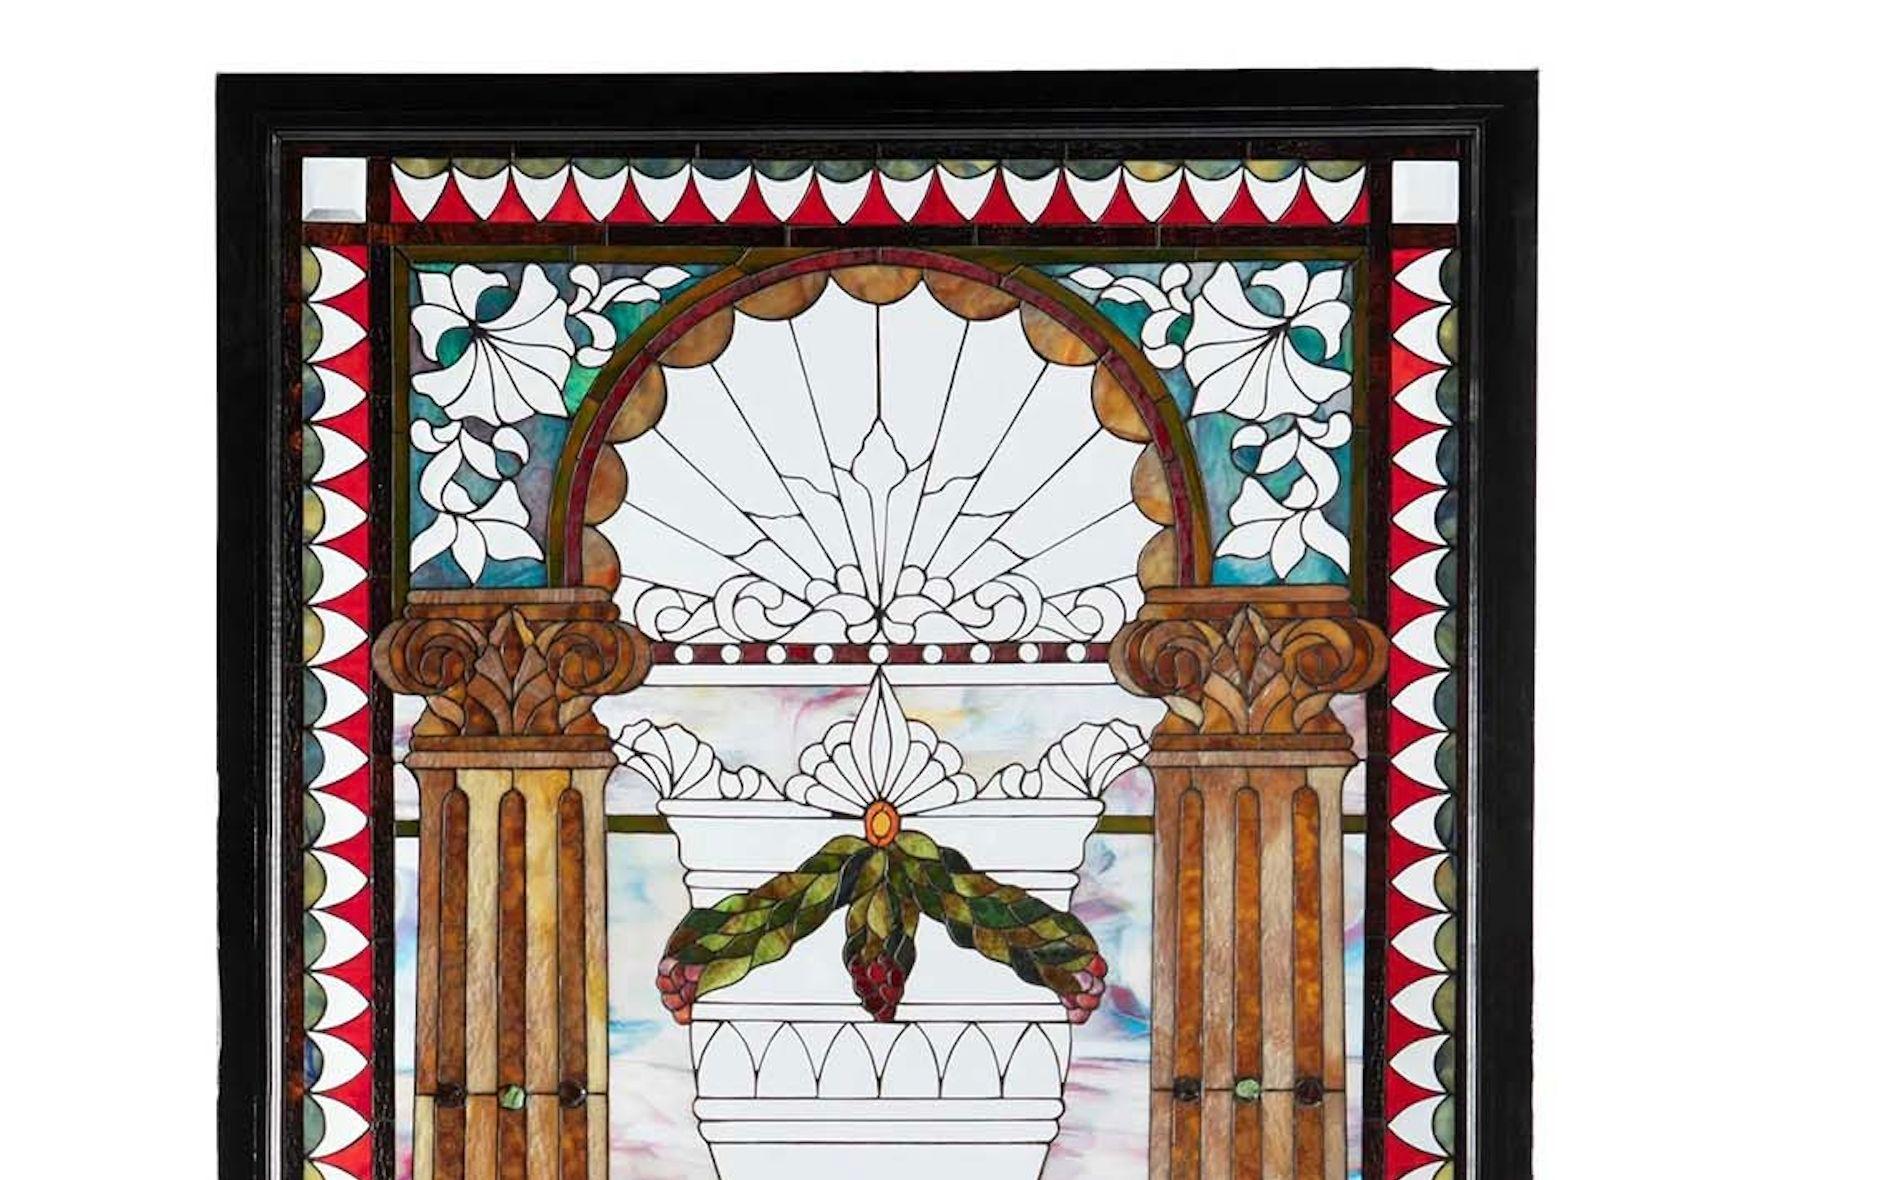 Late 19th century American Victorian leaded glass window (Tiffany quality)

The multi-colored window with leaded slag glass, rippled glass, opalescent glass, and clear bevel glass in pastel colors with floral and urn central motifs in between two